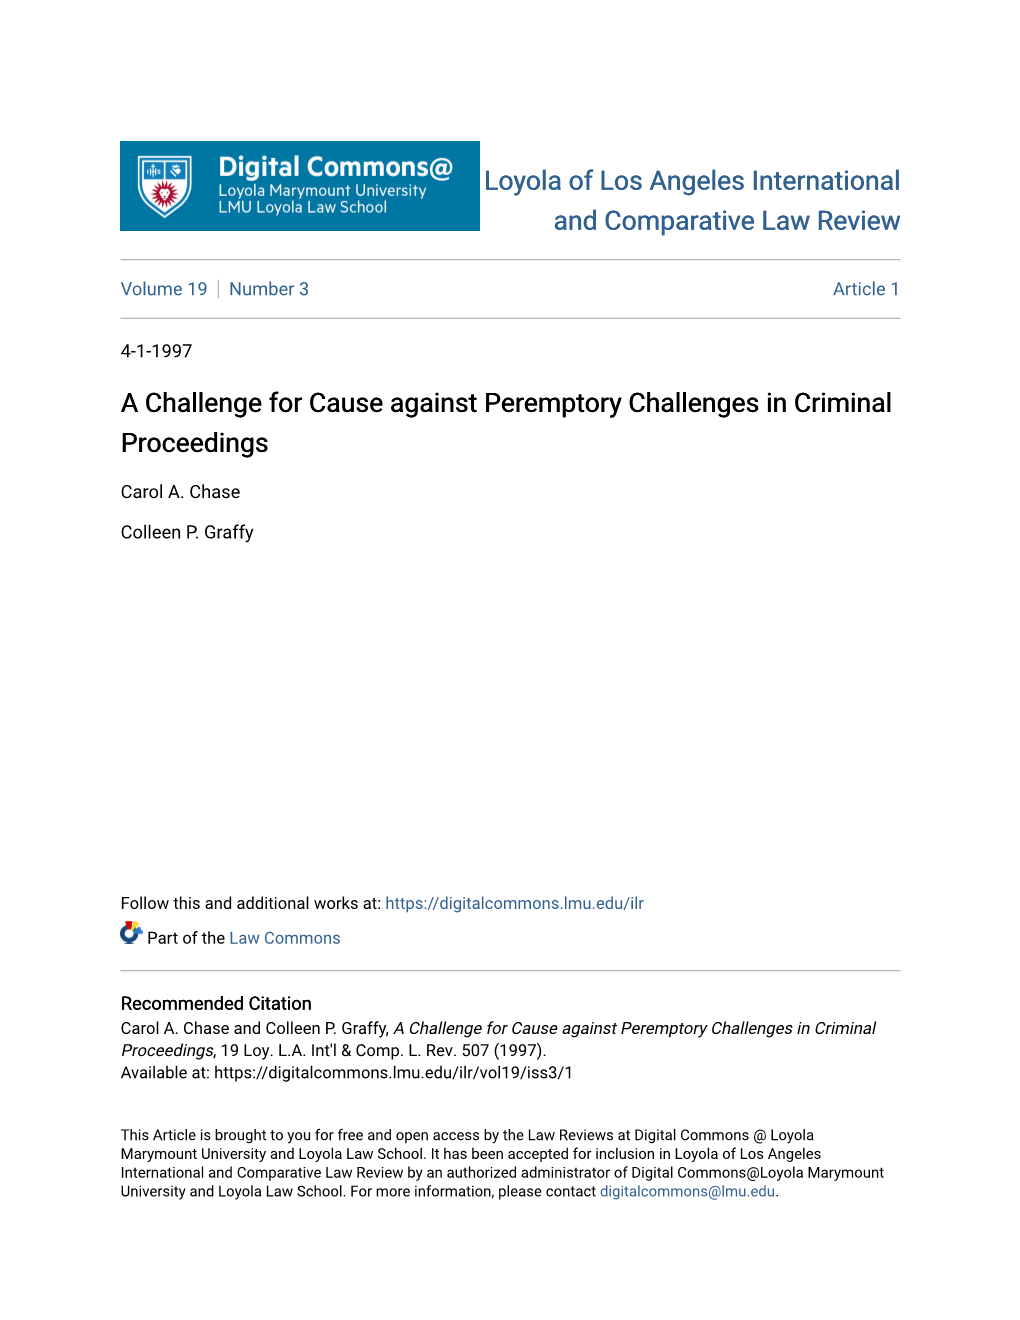 A Challenge for Cause Against Peremptory Challenges in Criminal Proceedings